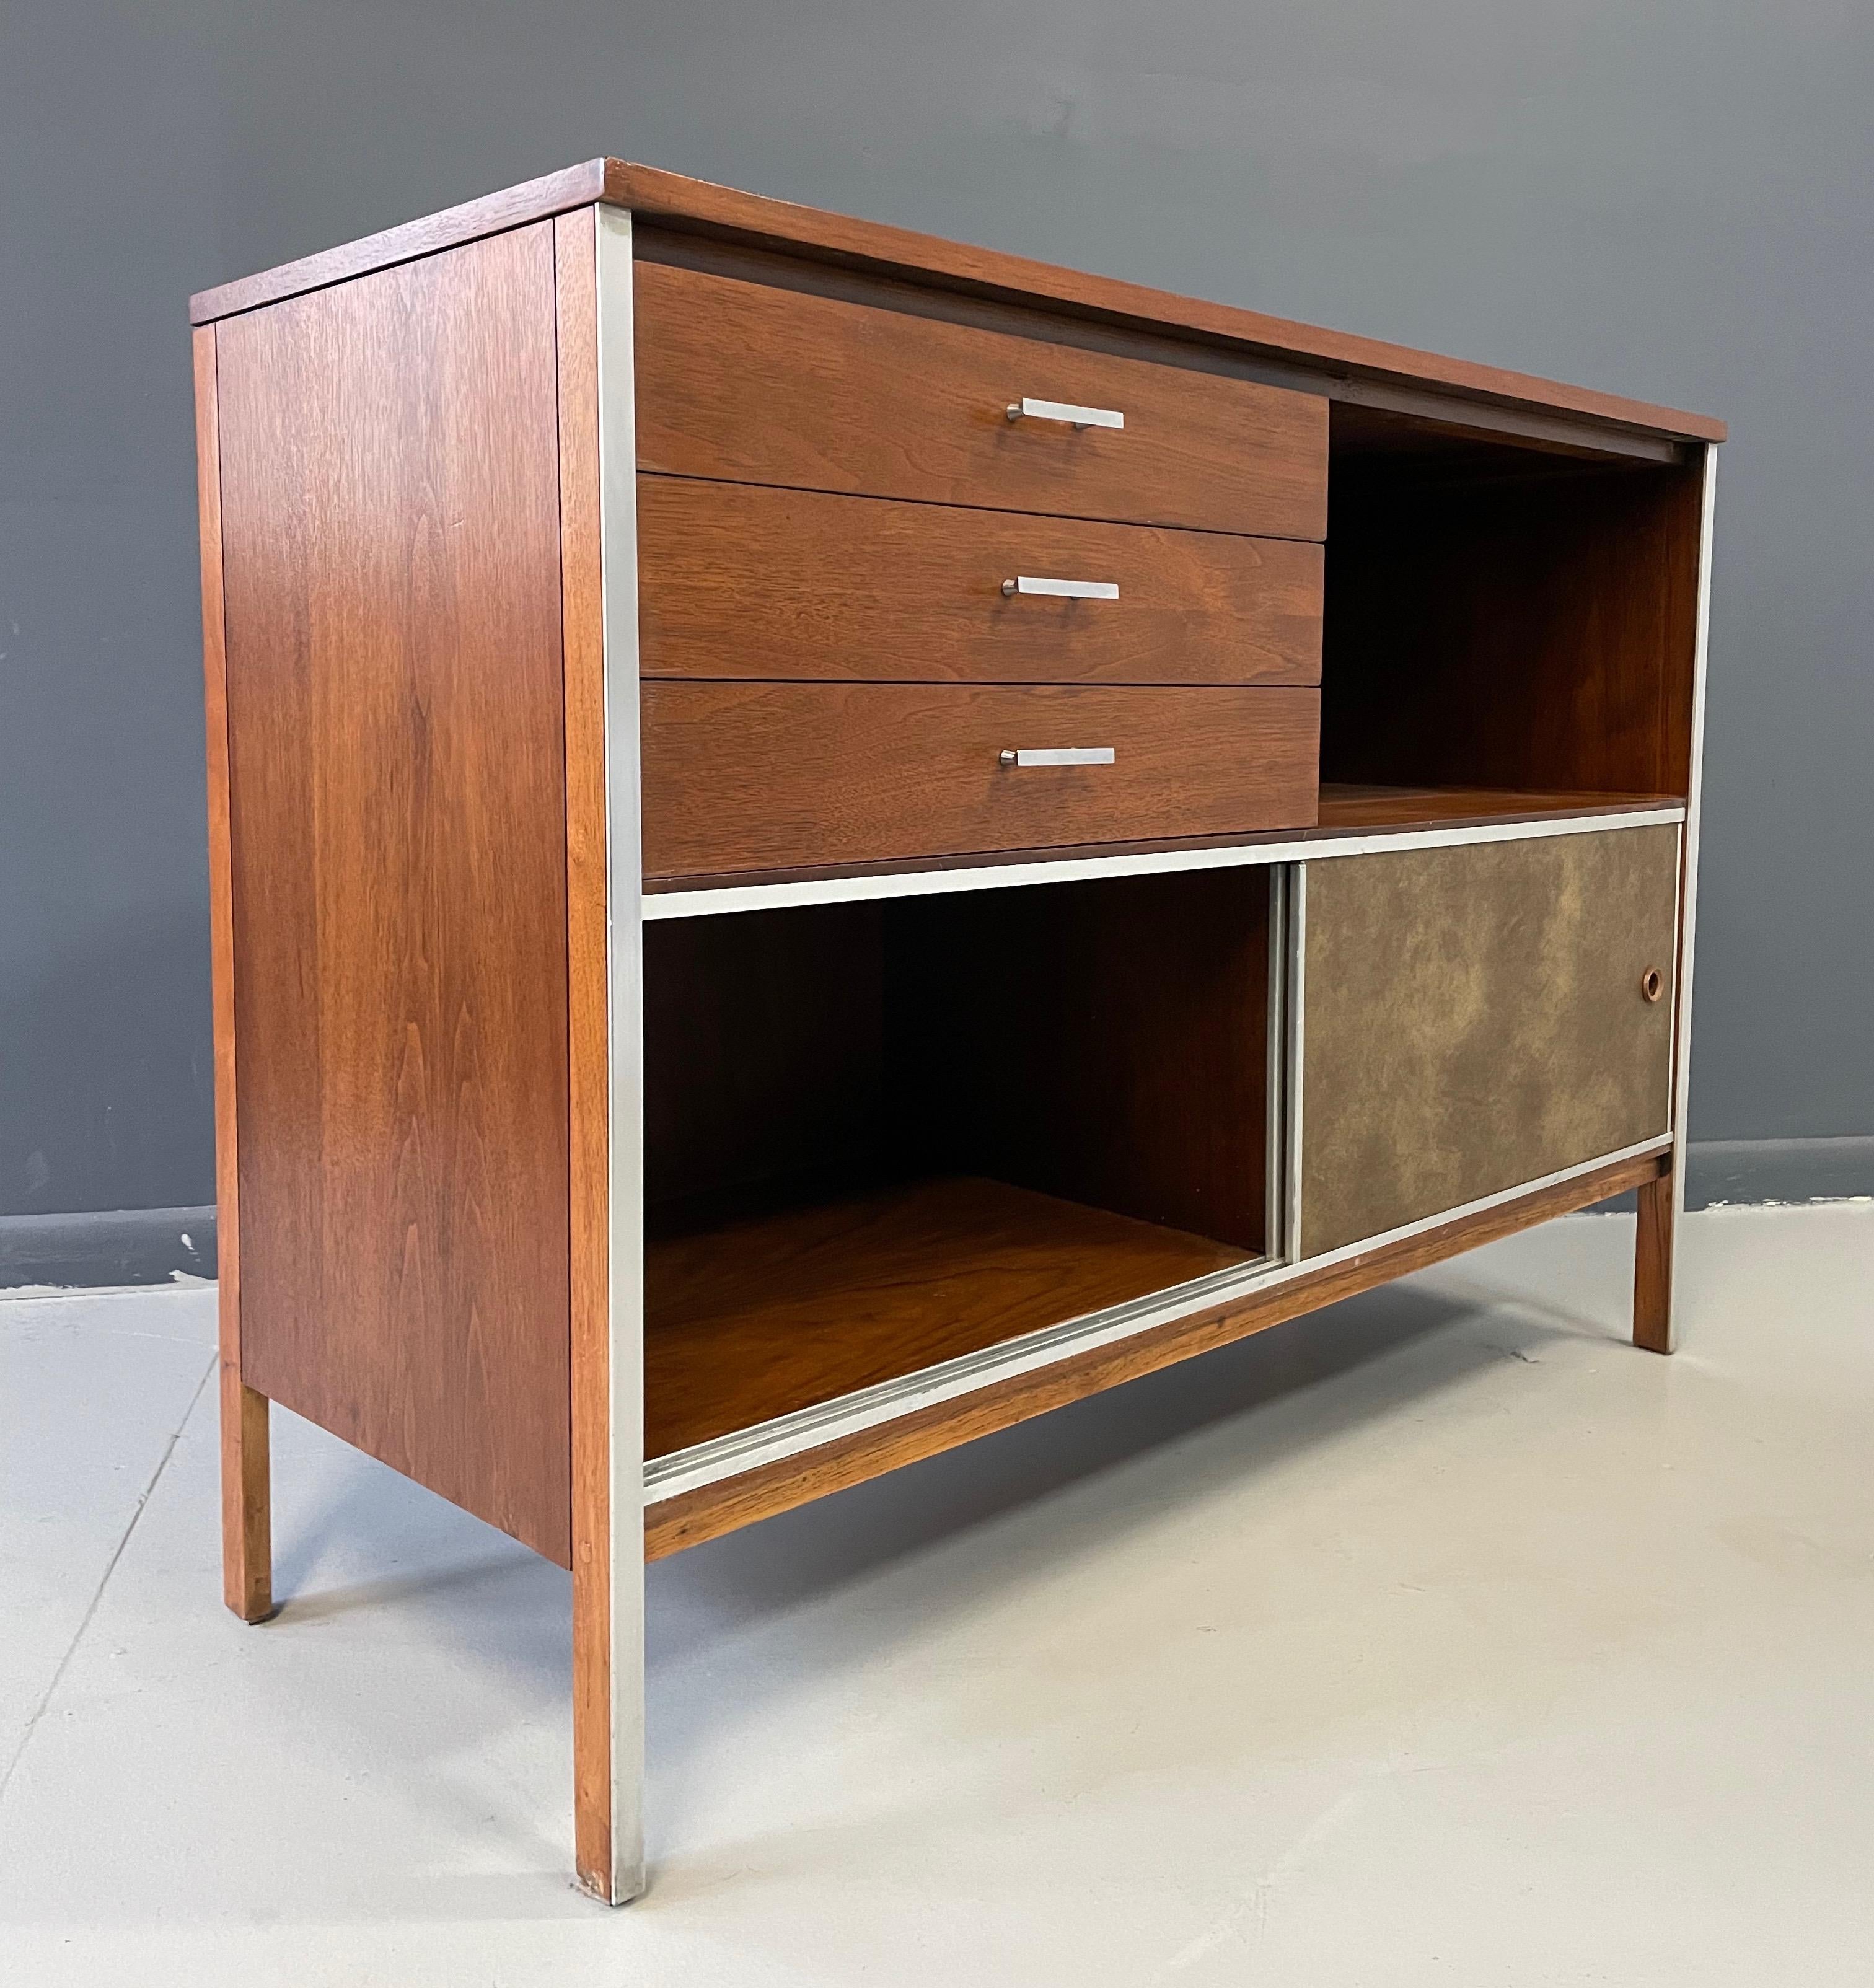 Walnut Paul McCobb Credenza for Calvin Furniture With 3 Drawers and 2 Sliding Doors